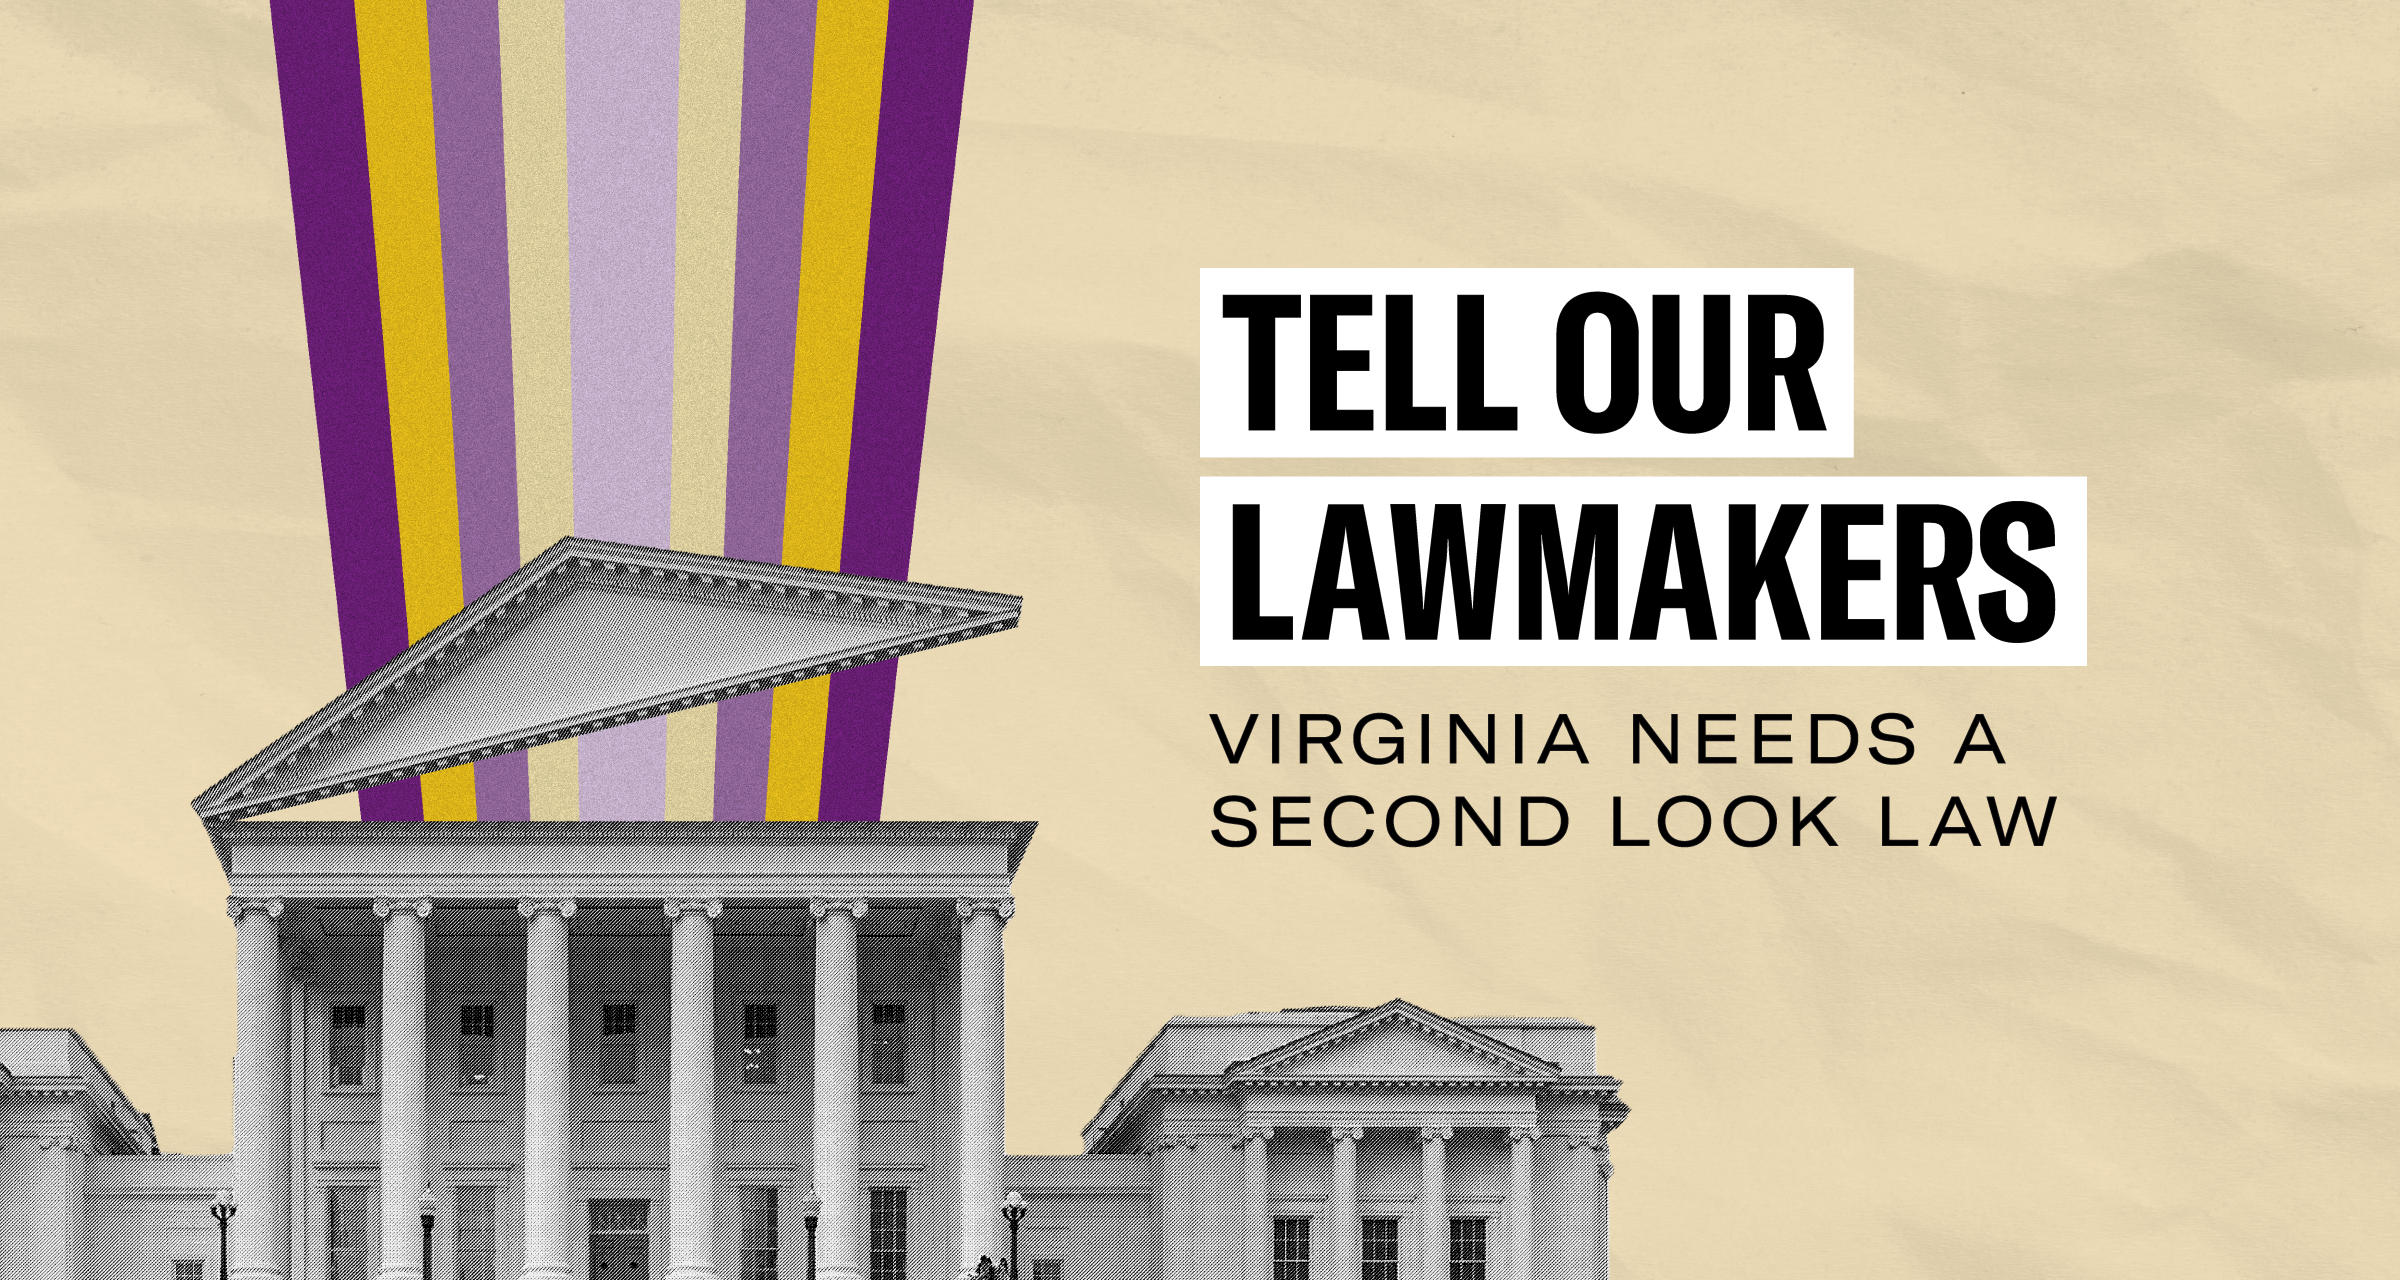 Over a tan winkled paper is the following bolded text "Tell our lawmakers -- Virginia needs a second look law."